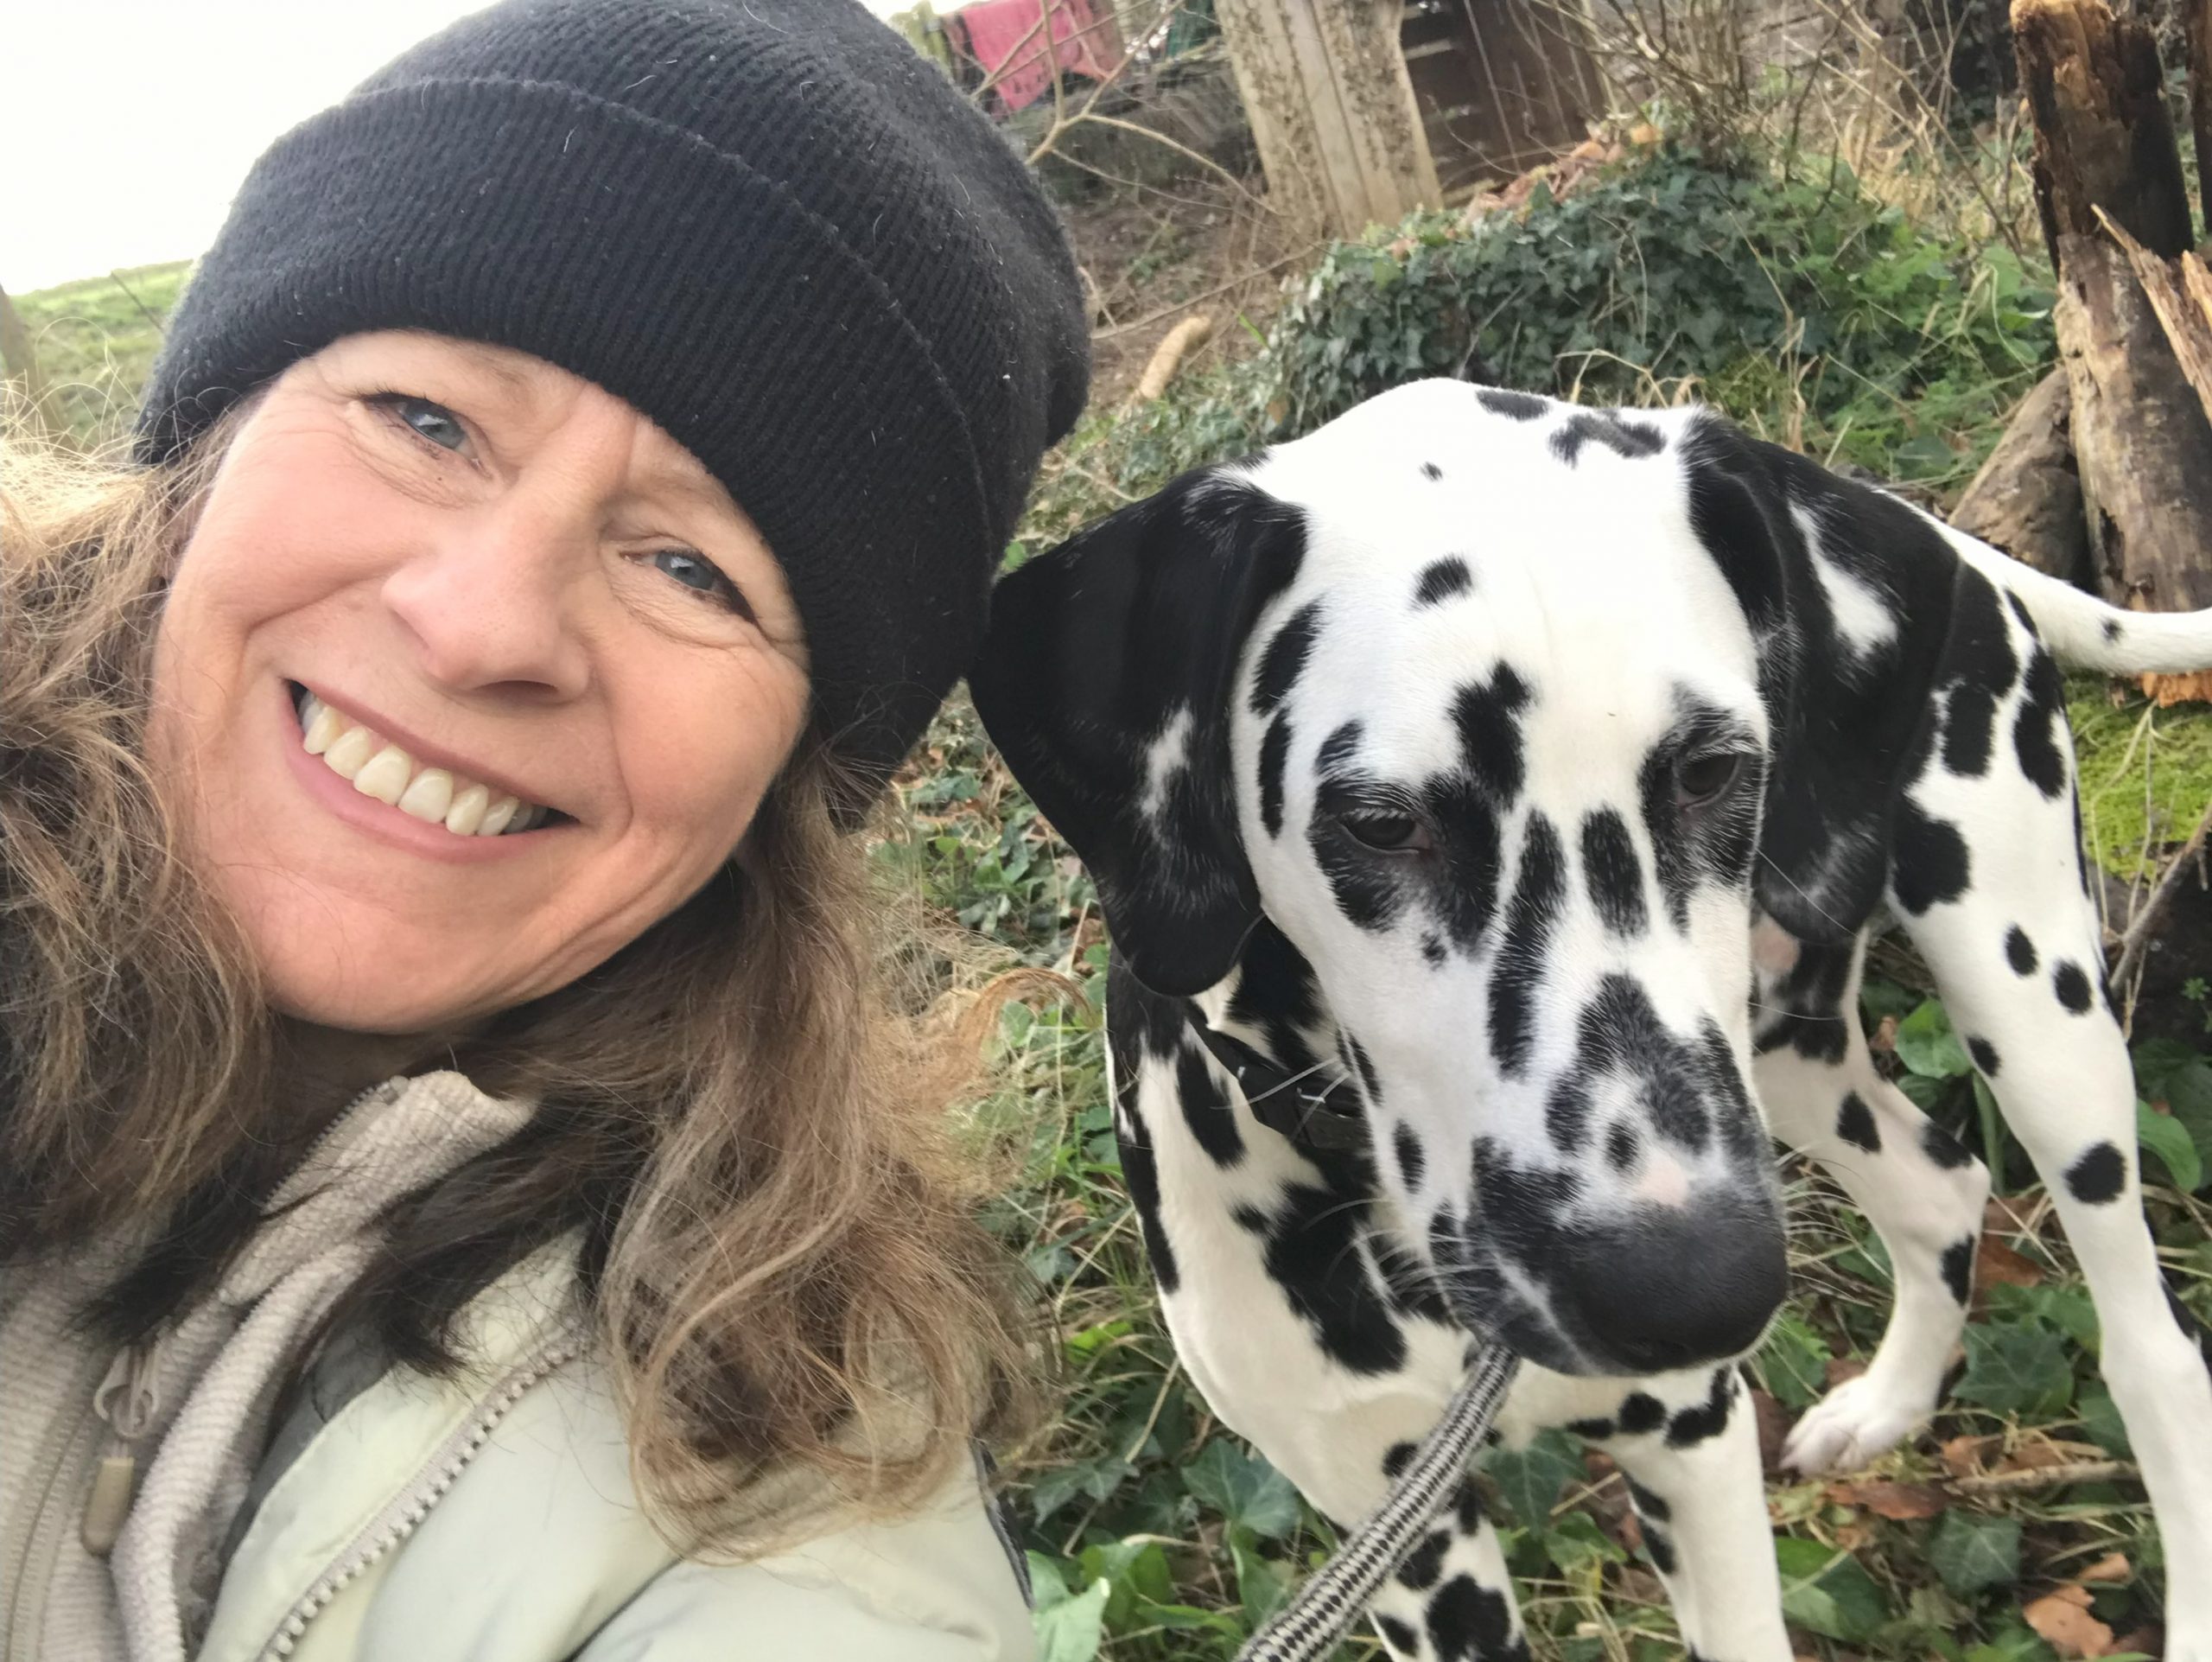 From 100 Ways to 101 Dalmatians: pet ownership, the eco way